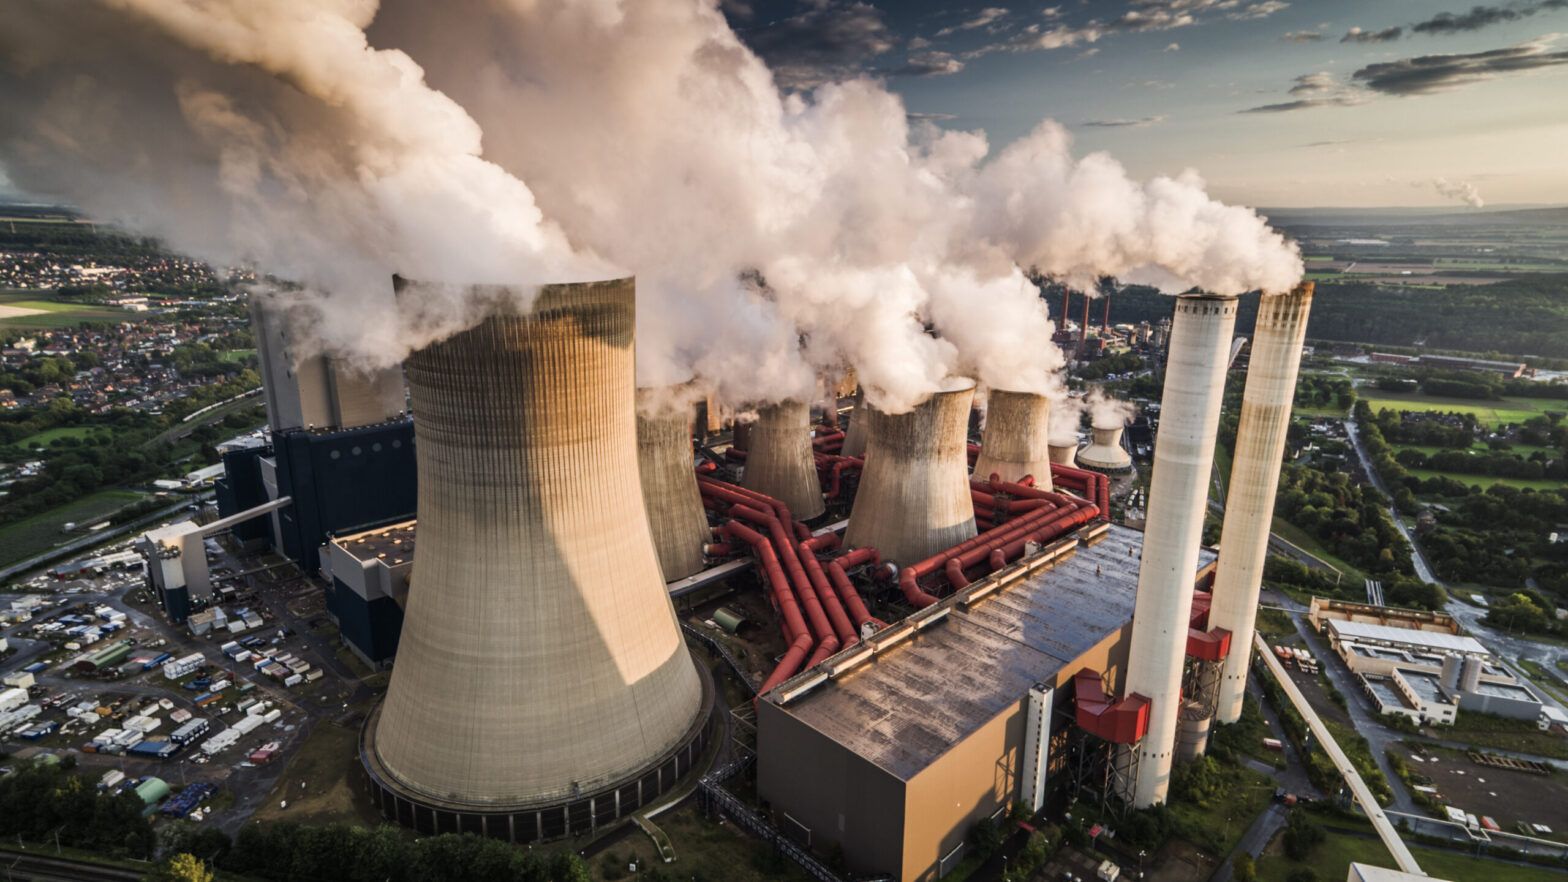 Without coal exclusions climate commitments are just ‘hot air’